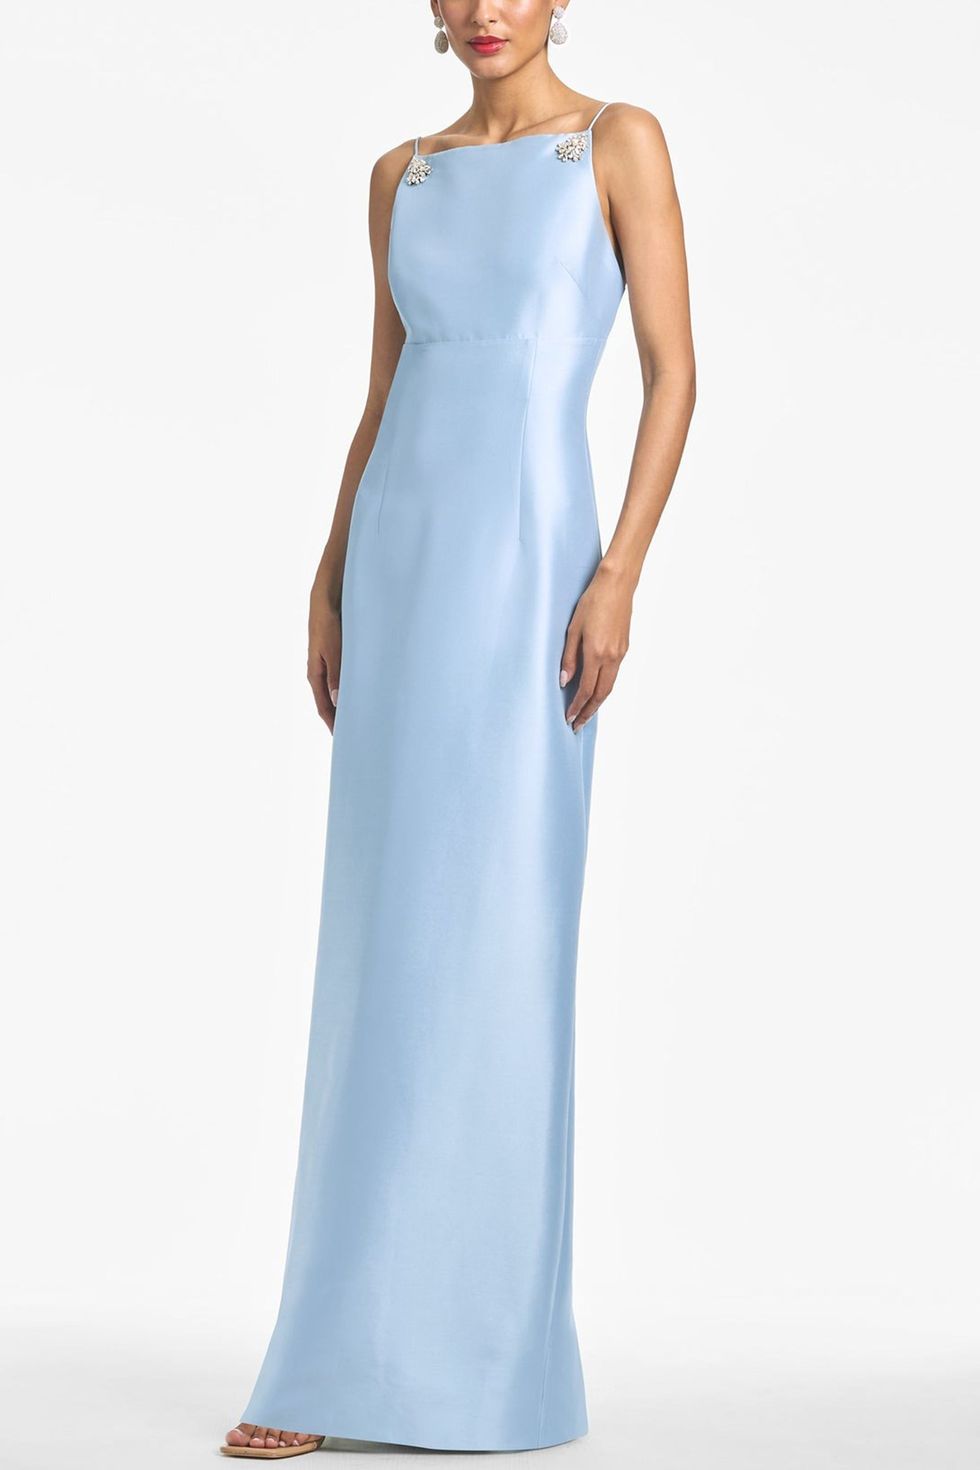 40 Winter Wedding Guest Dresses Perfect for the 2023 Season